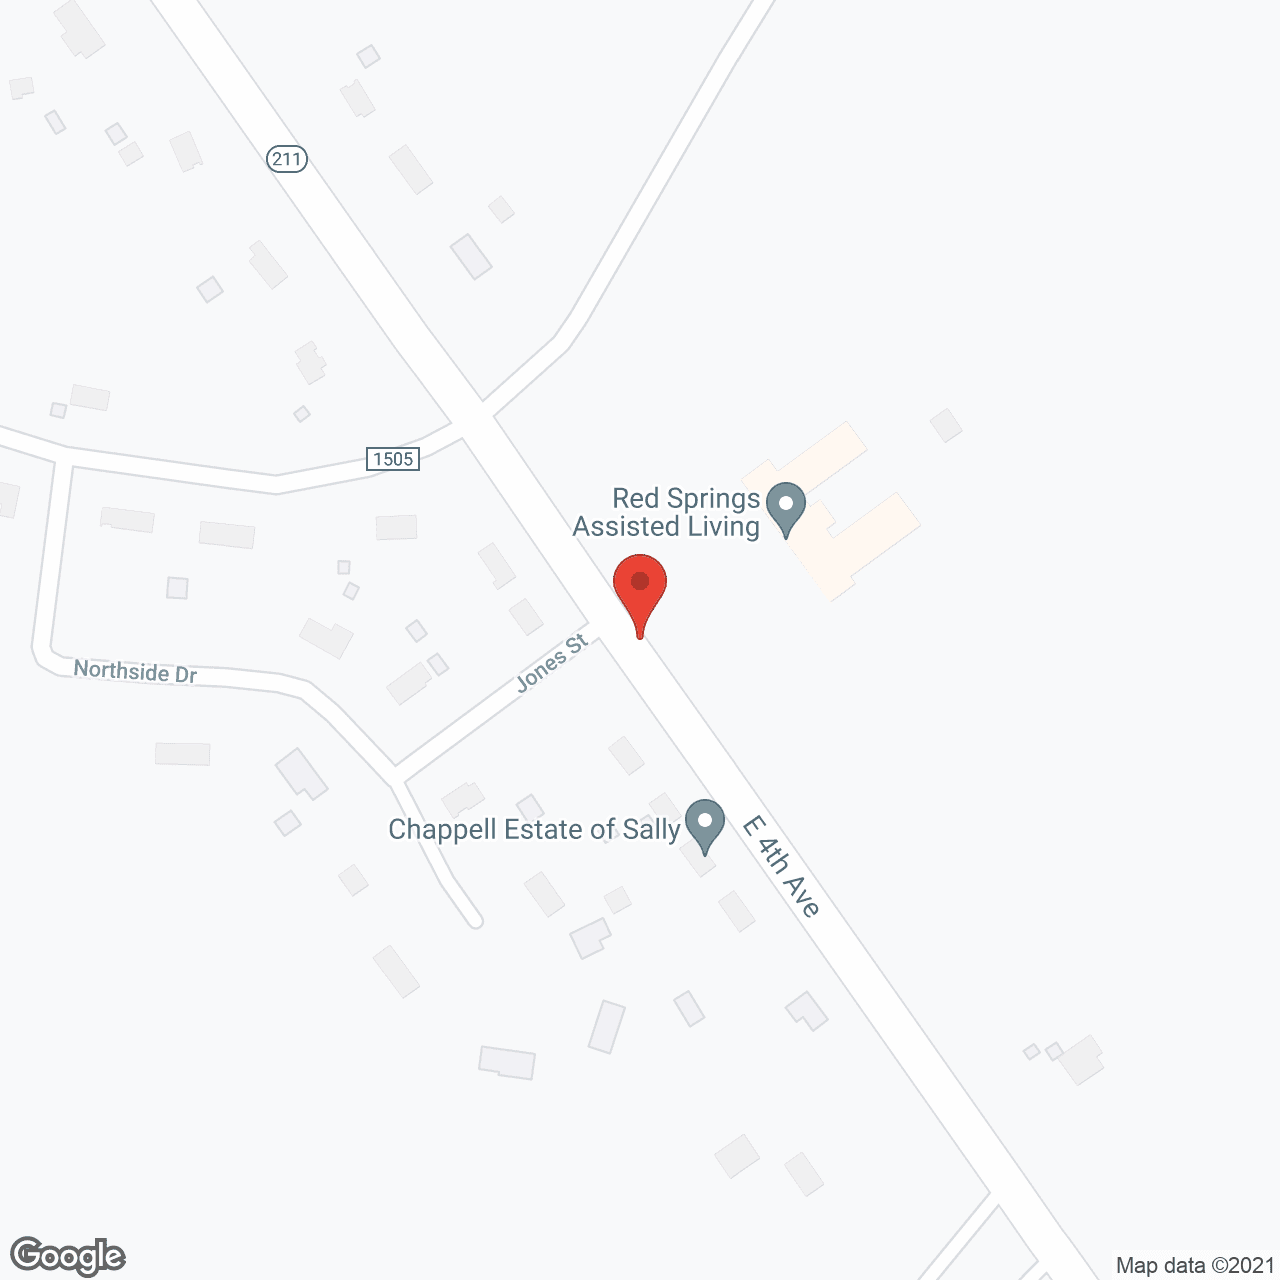 Red Springs Assisted Living in google map